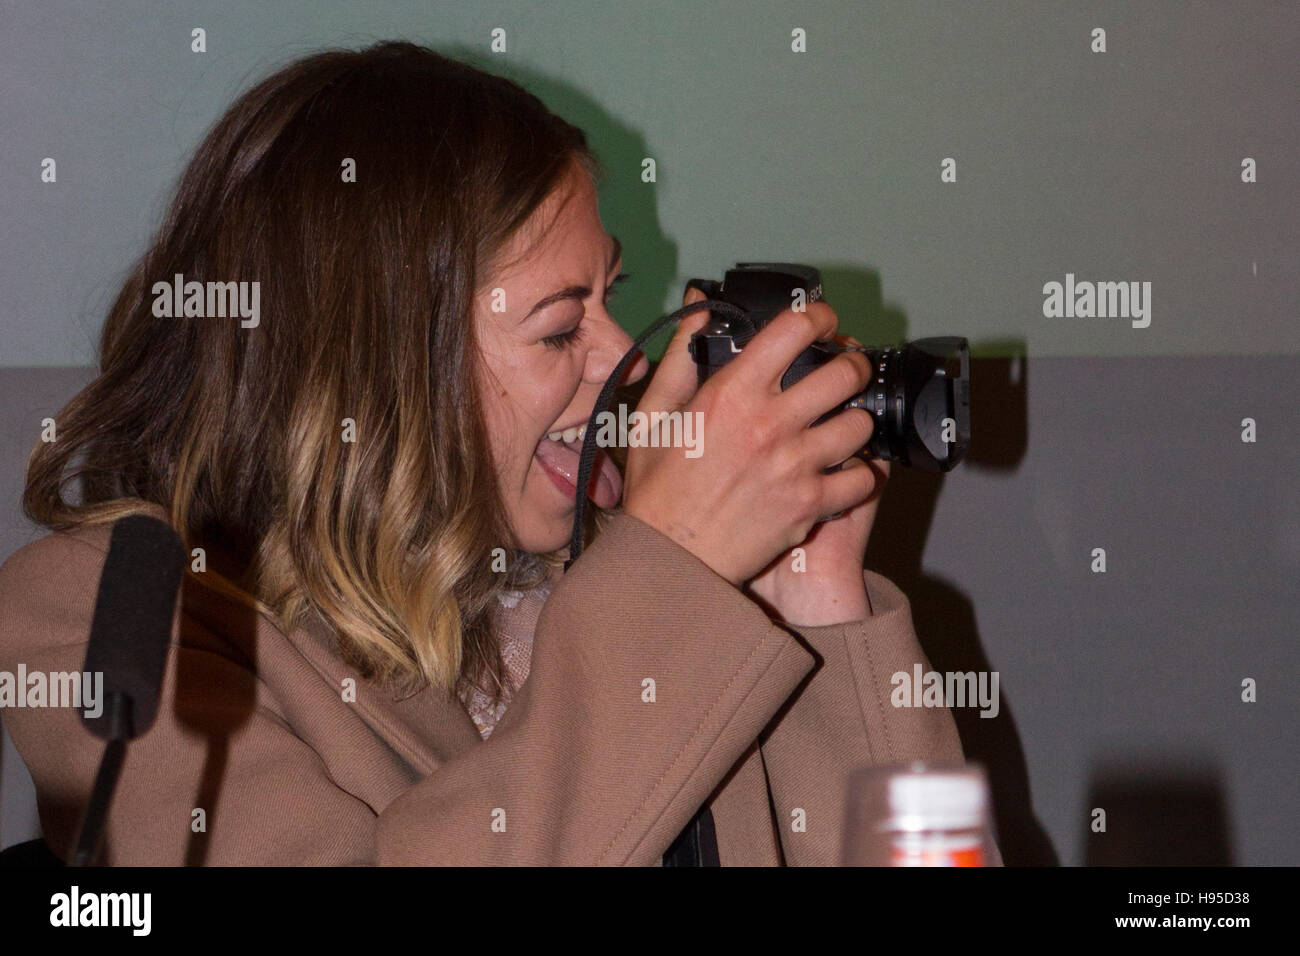 Torino, Italy. 19th Nov, 2016. Actress Analeigh Tipton taking pictures during a press conference at Torino Film Festival Stock Photo